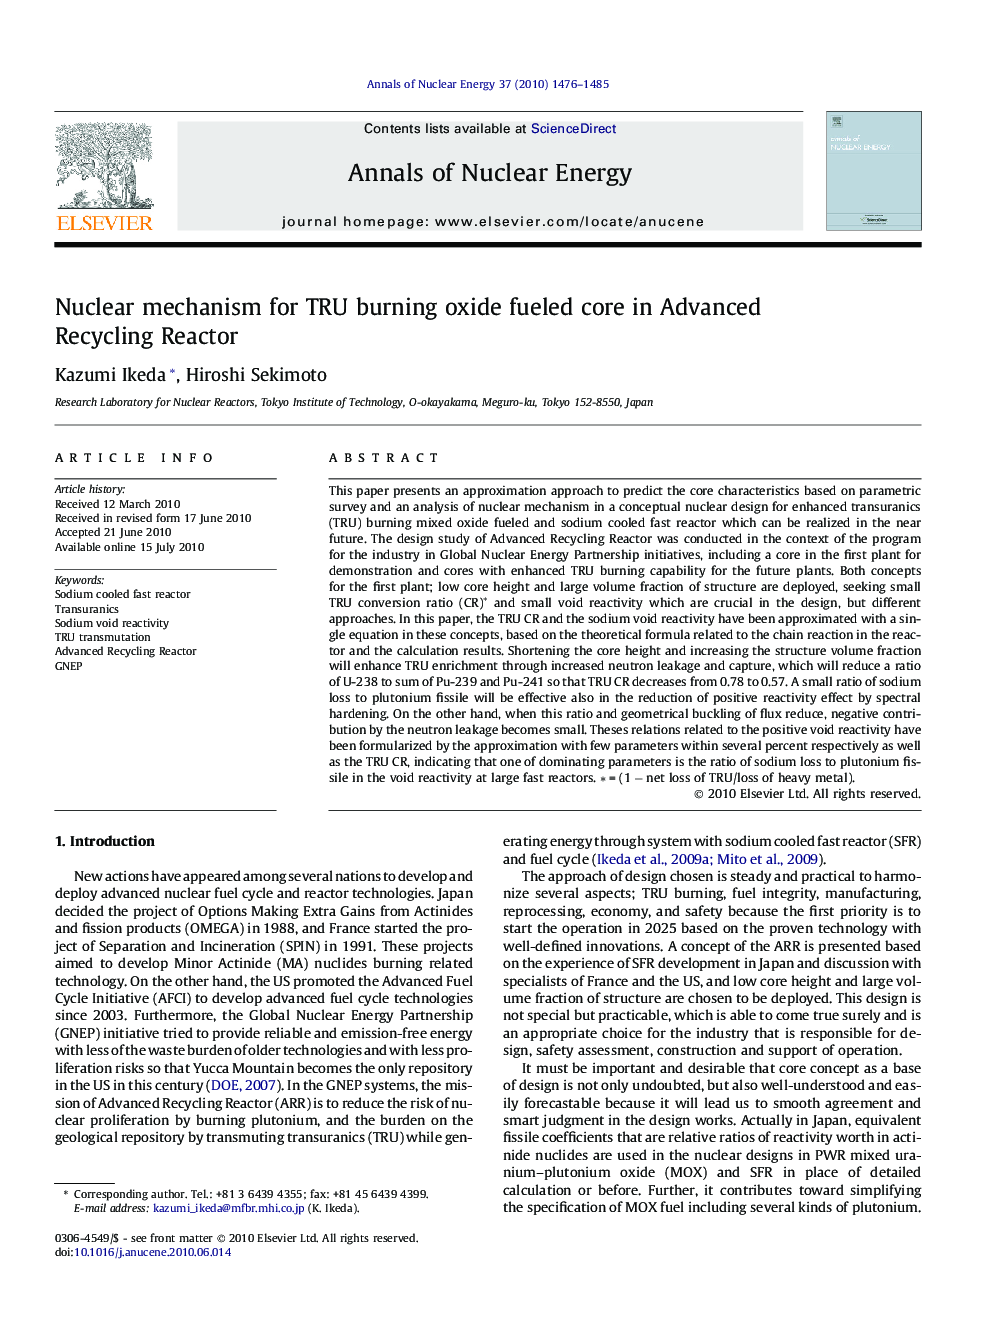 Nuclear mechanism for TRU burning oxide fueled core in Advanced Recycling Reactor